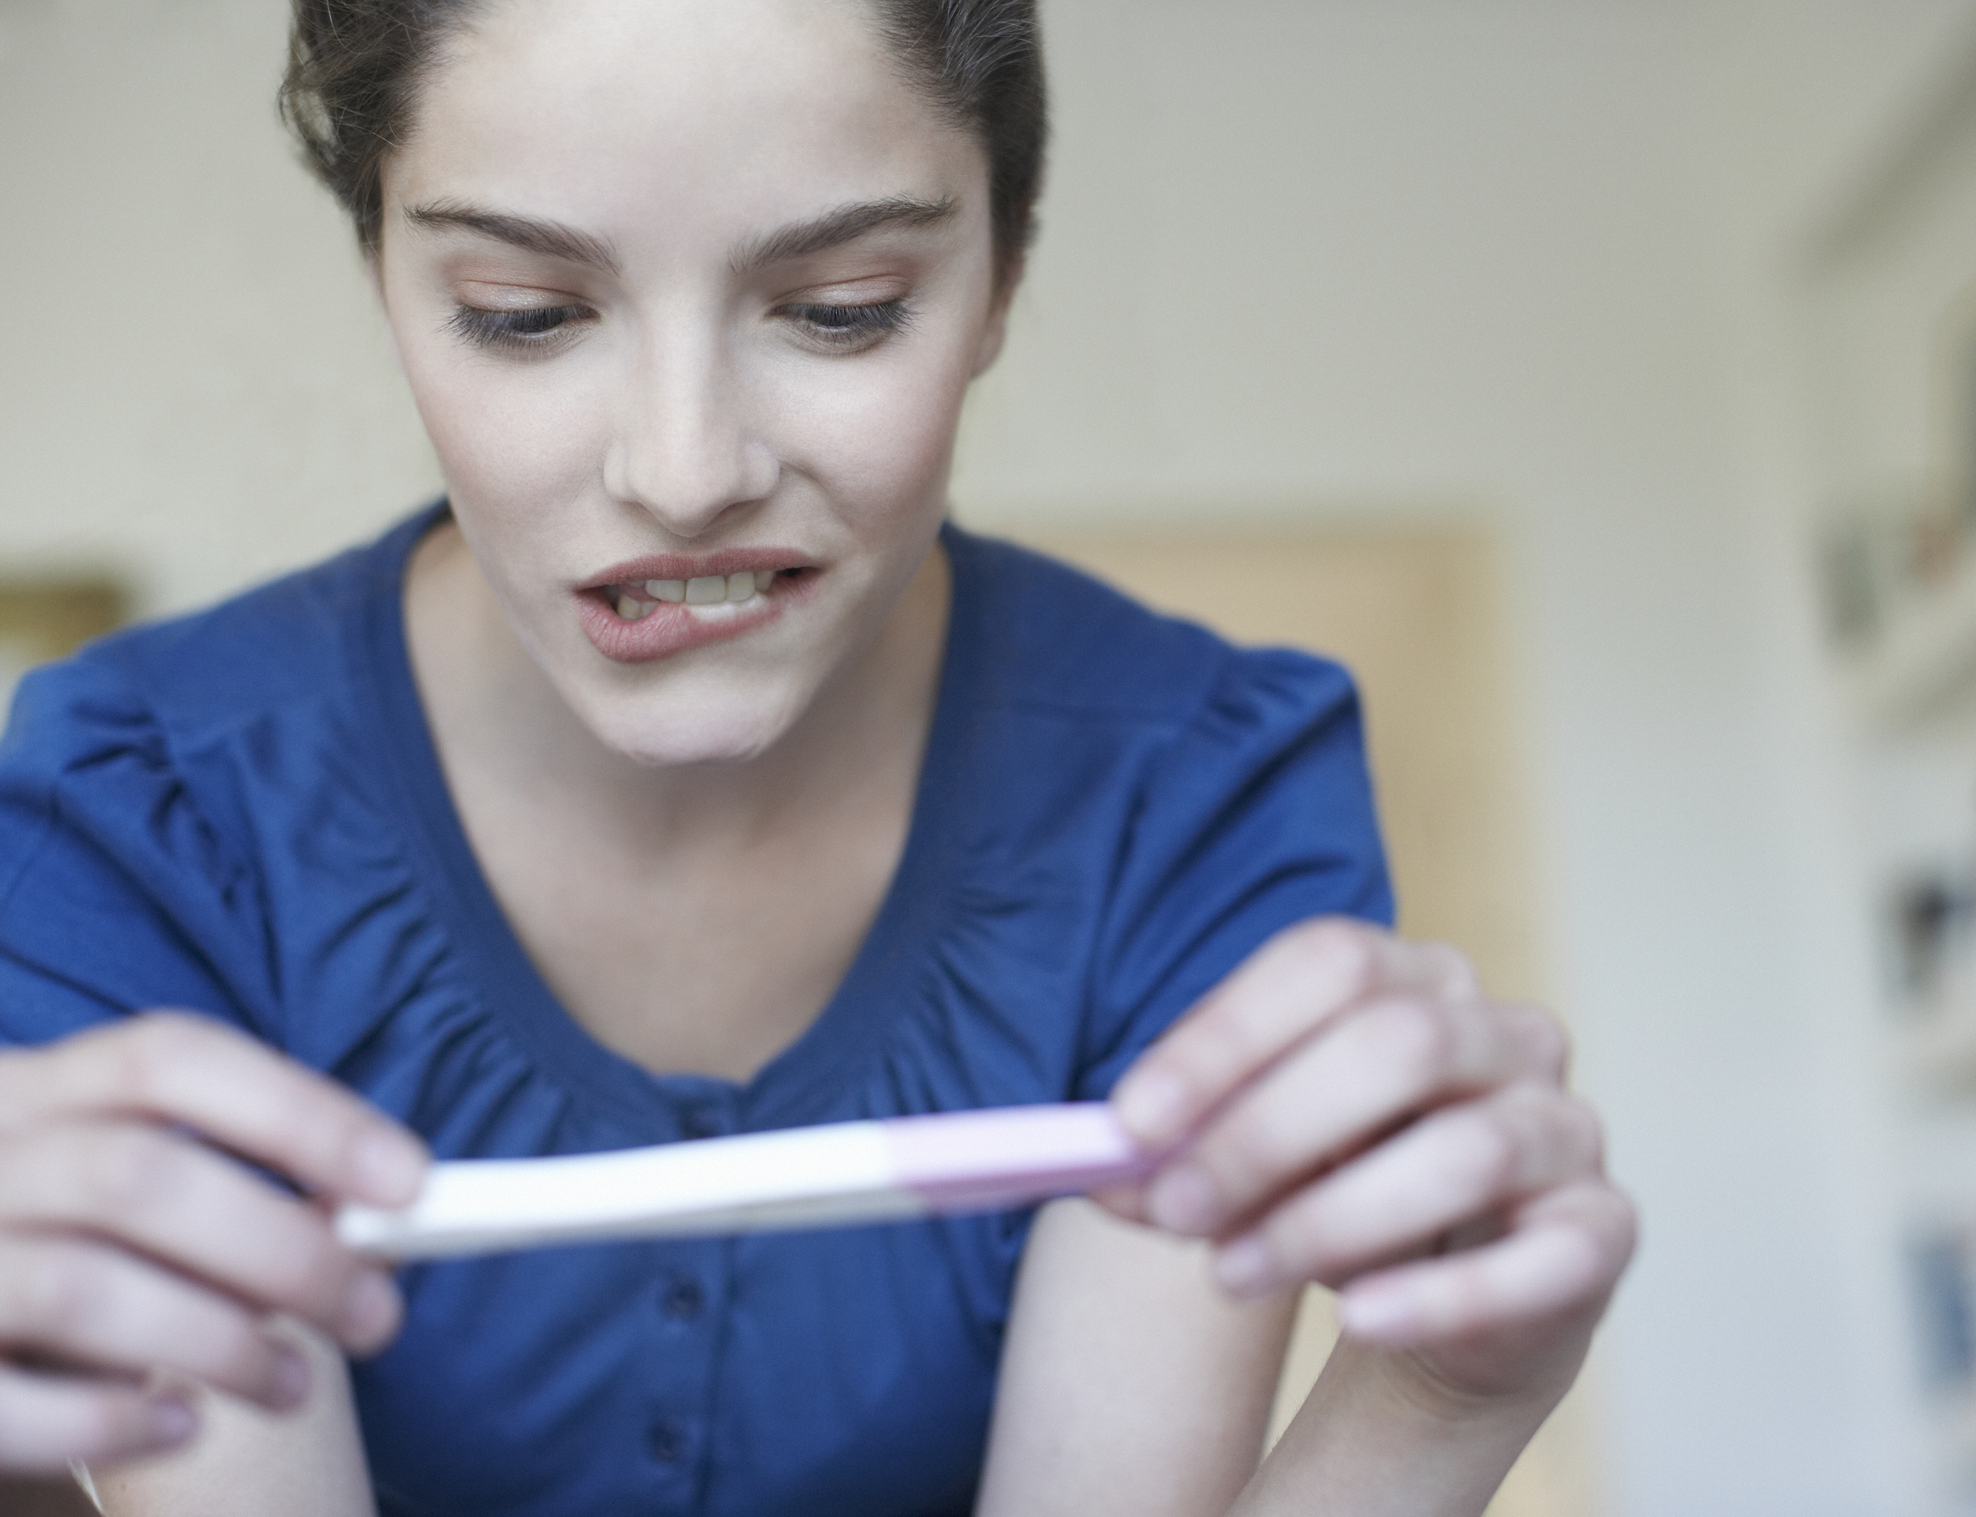 Trying to conceive? These symptoms warrant a consult